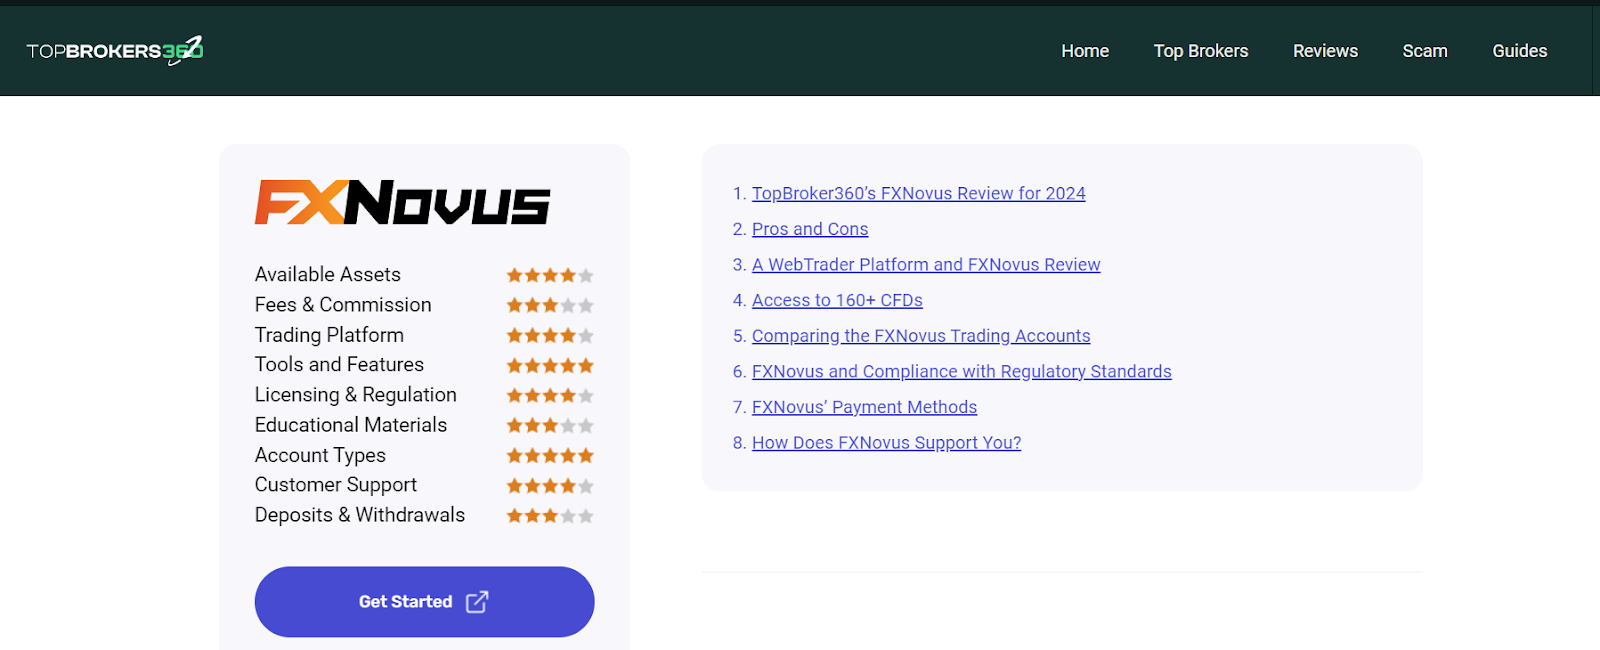 Top Brokers 360 Review of FXNovus